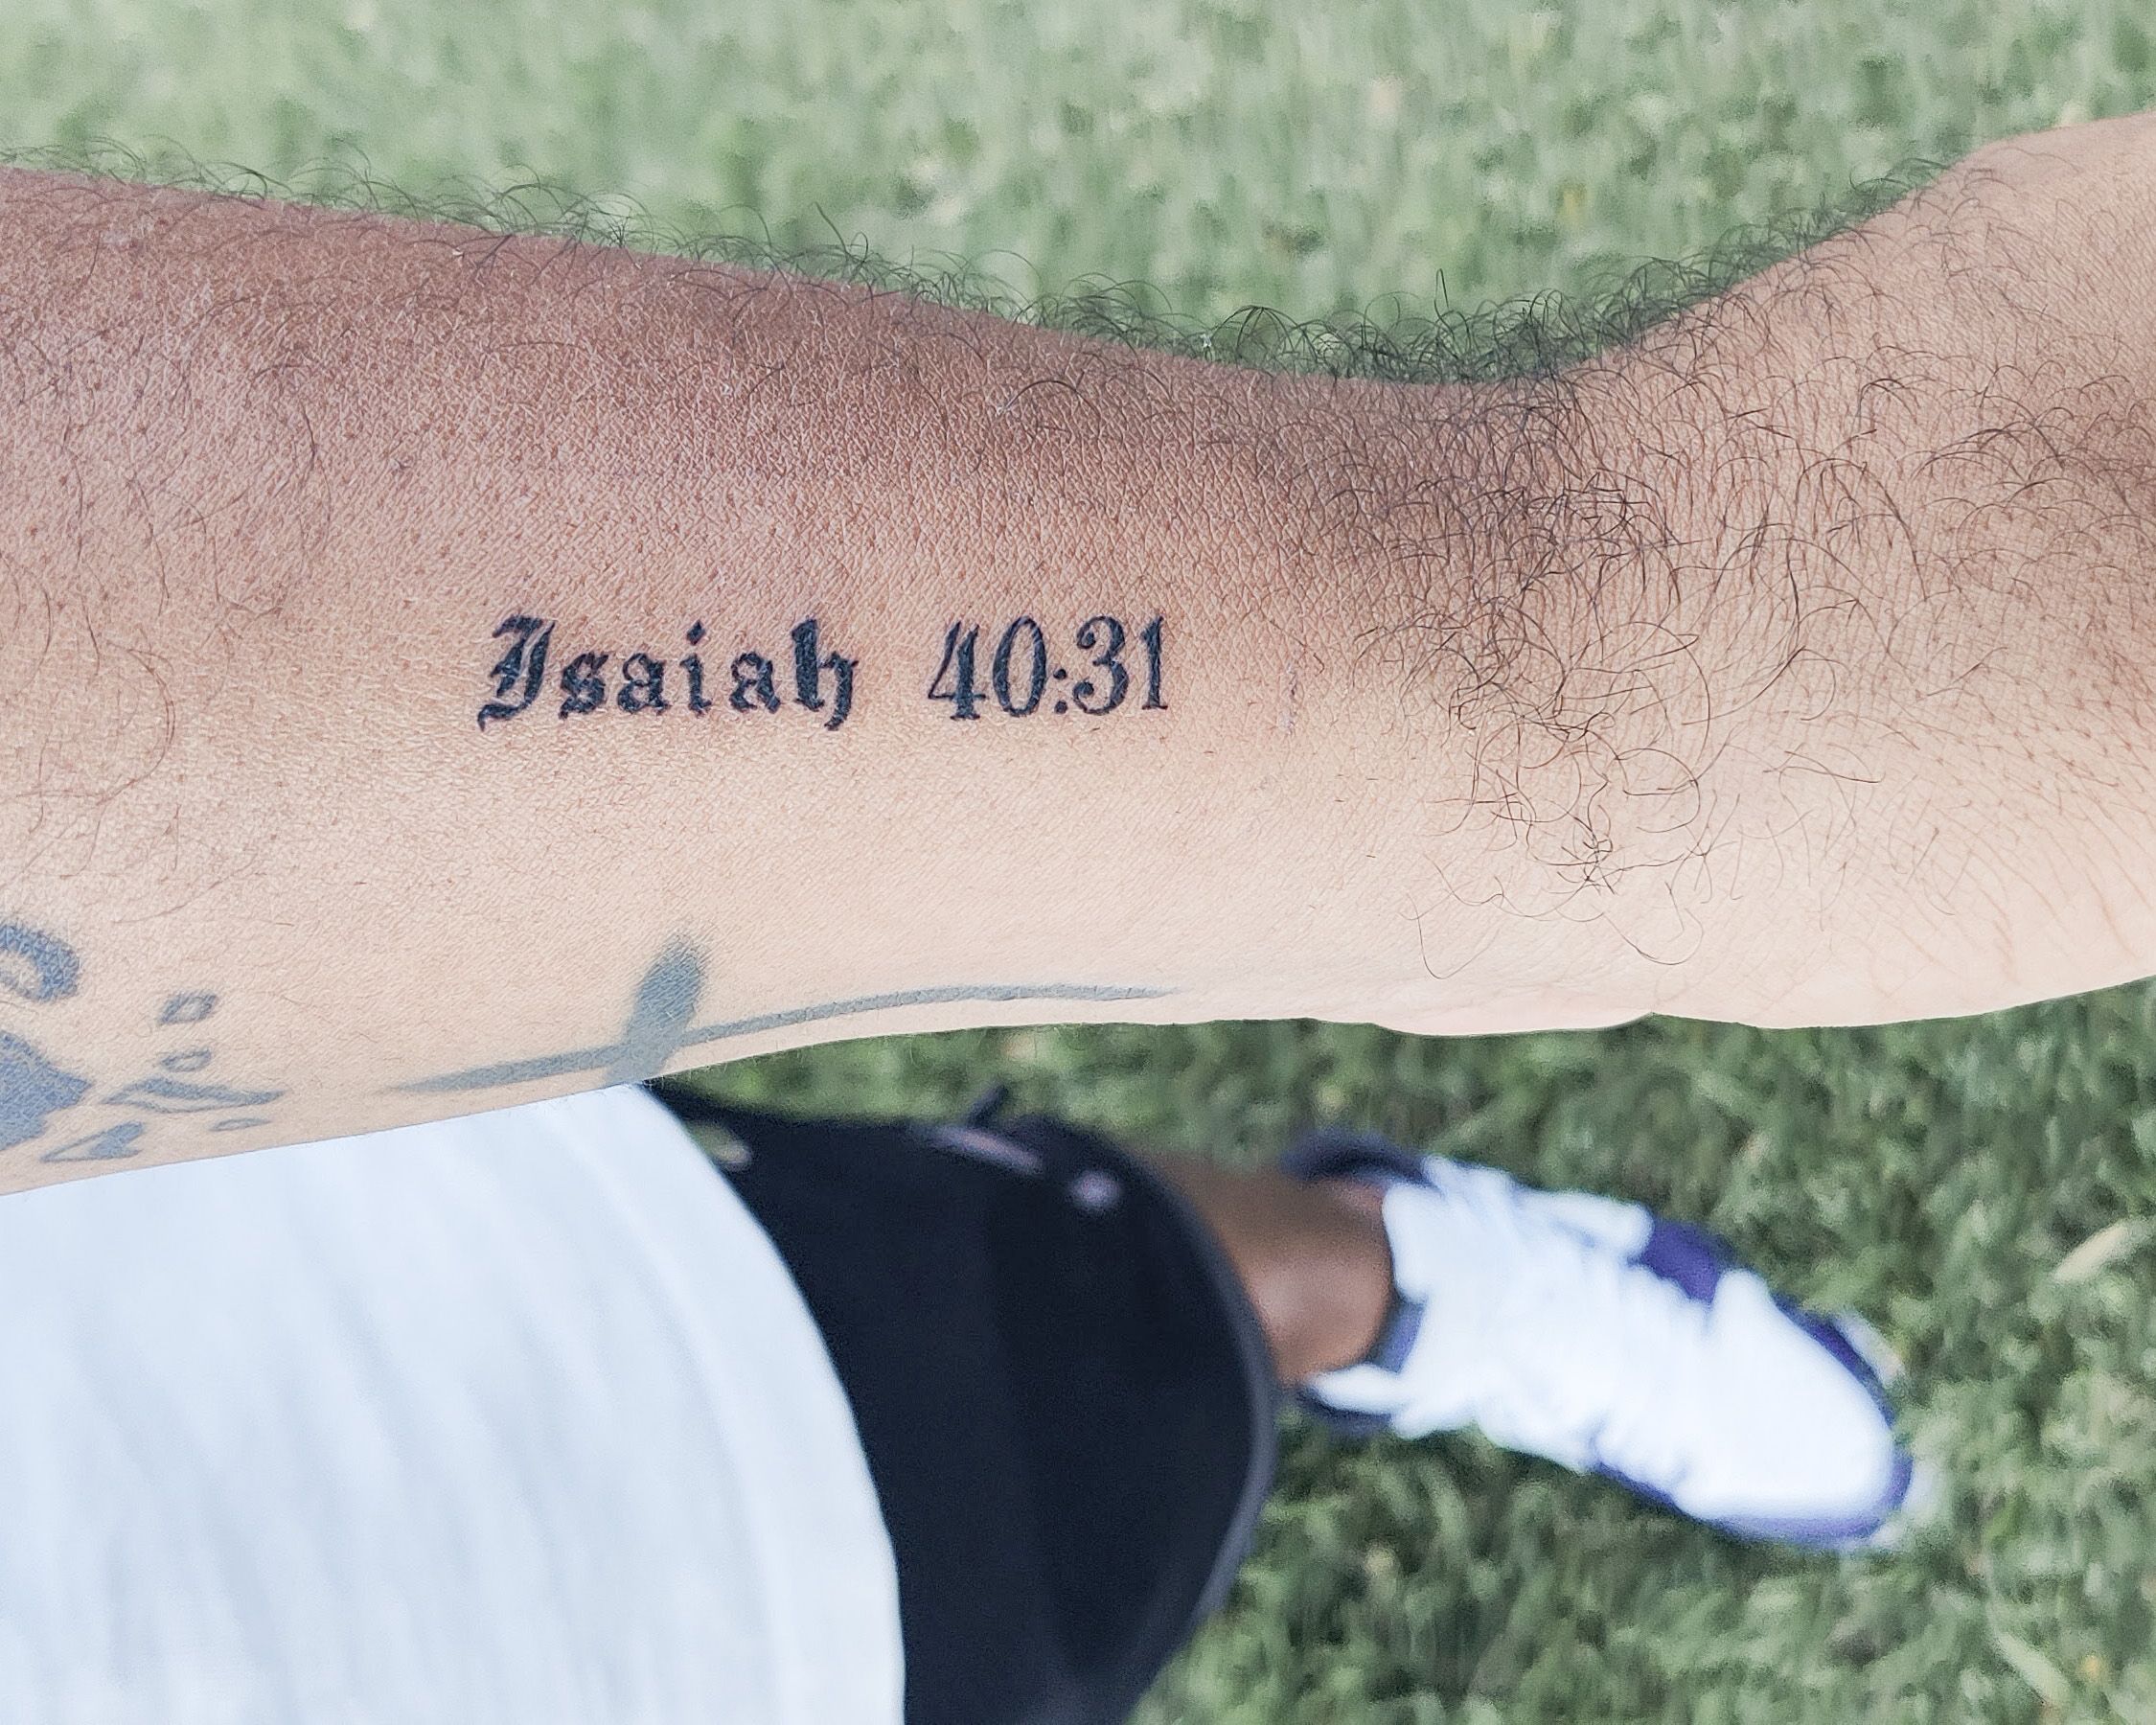 ISAIAH 4031 Completed with  Happy Sailor Tattoo Tonga  Facebook